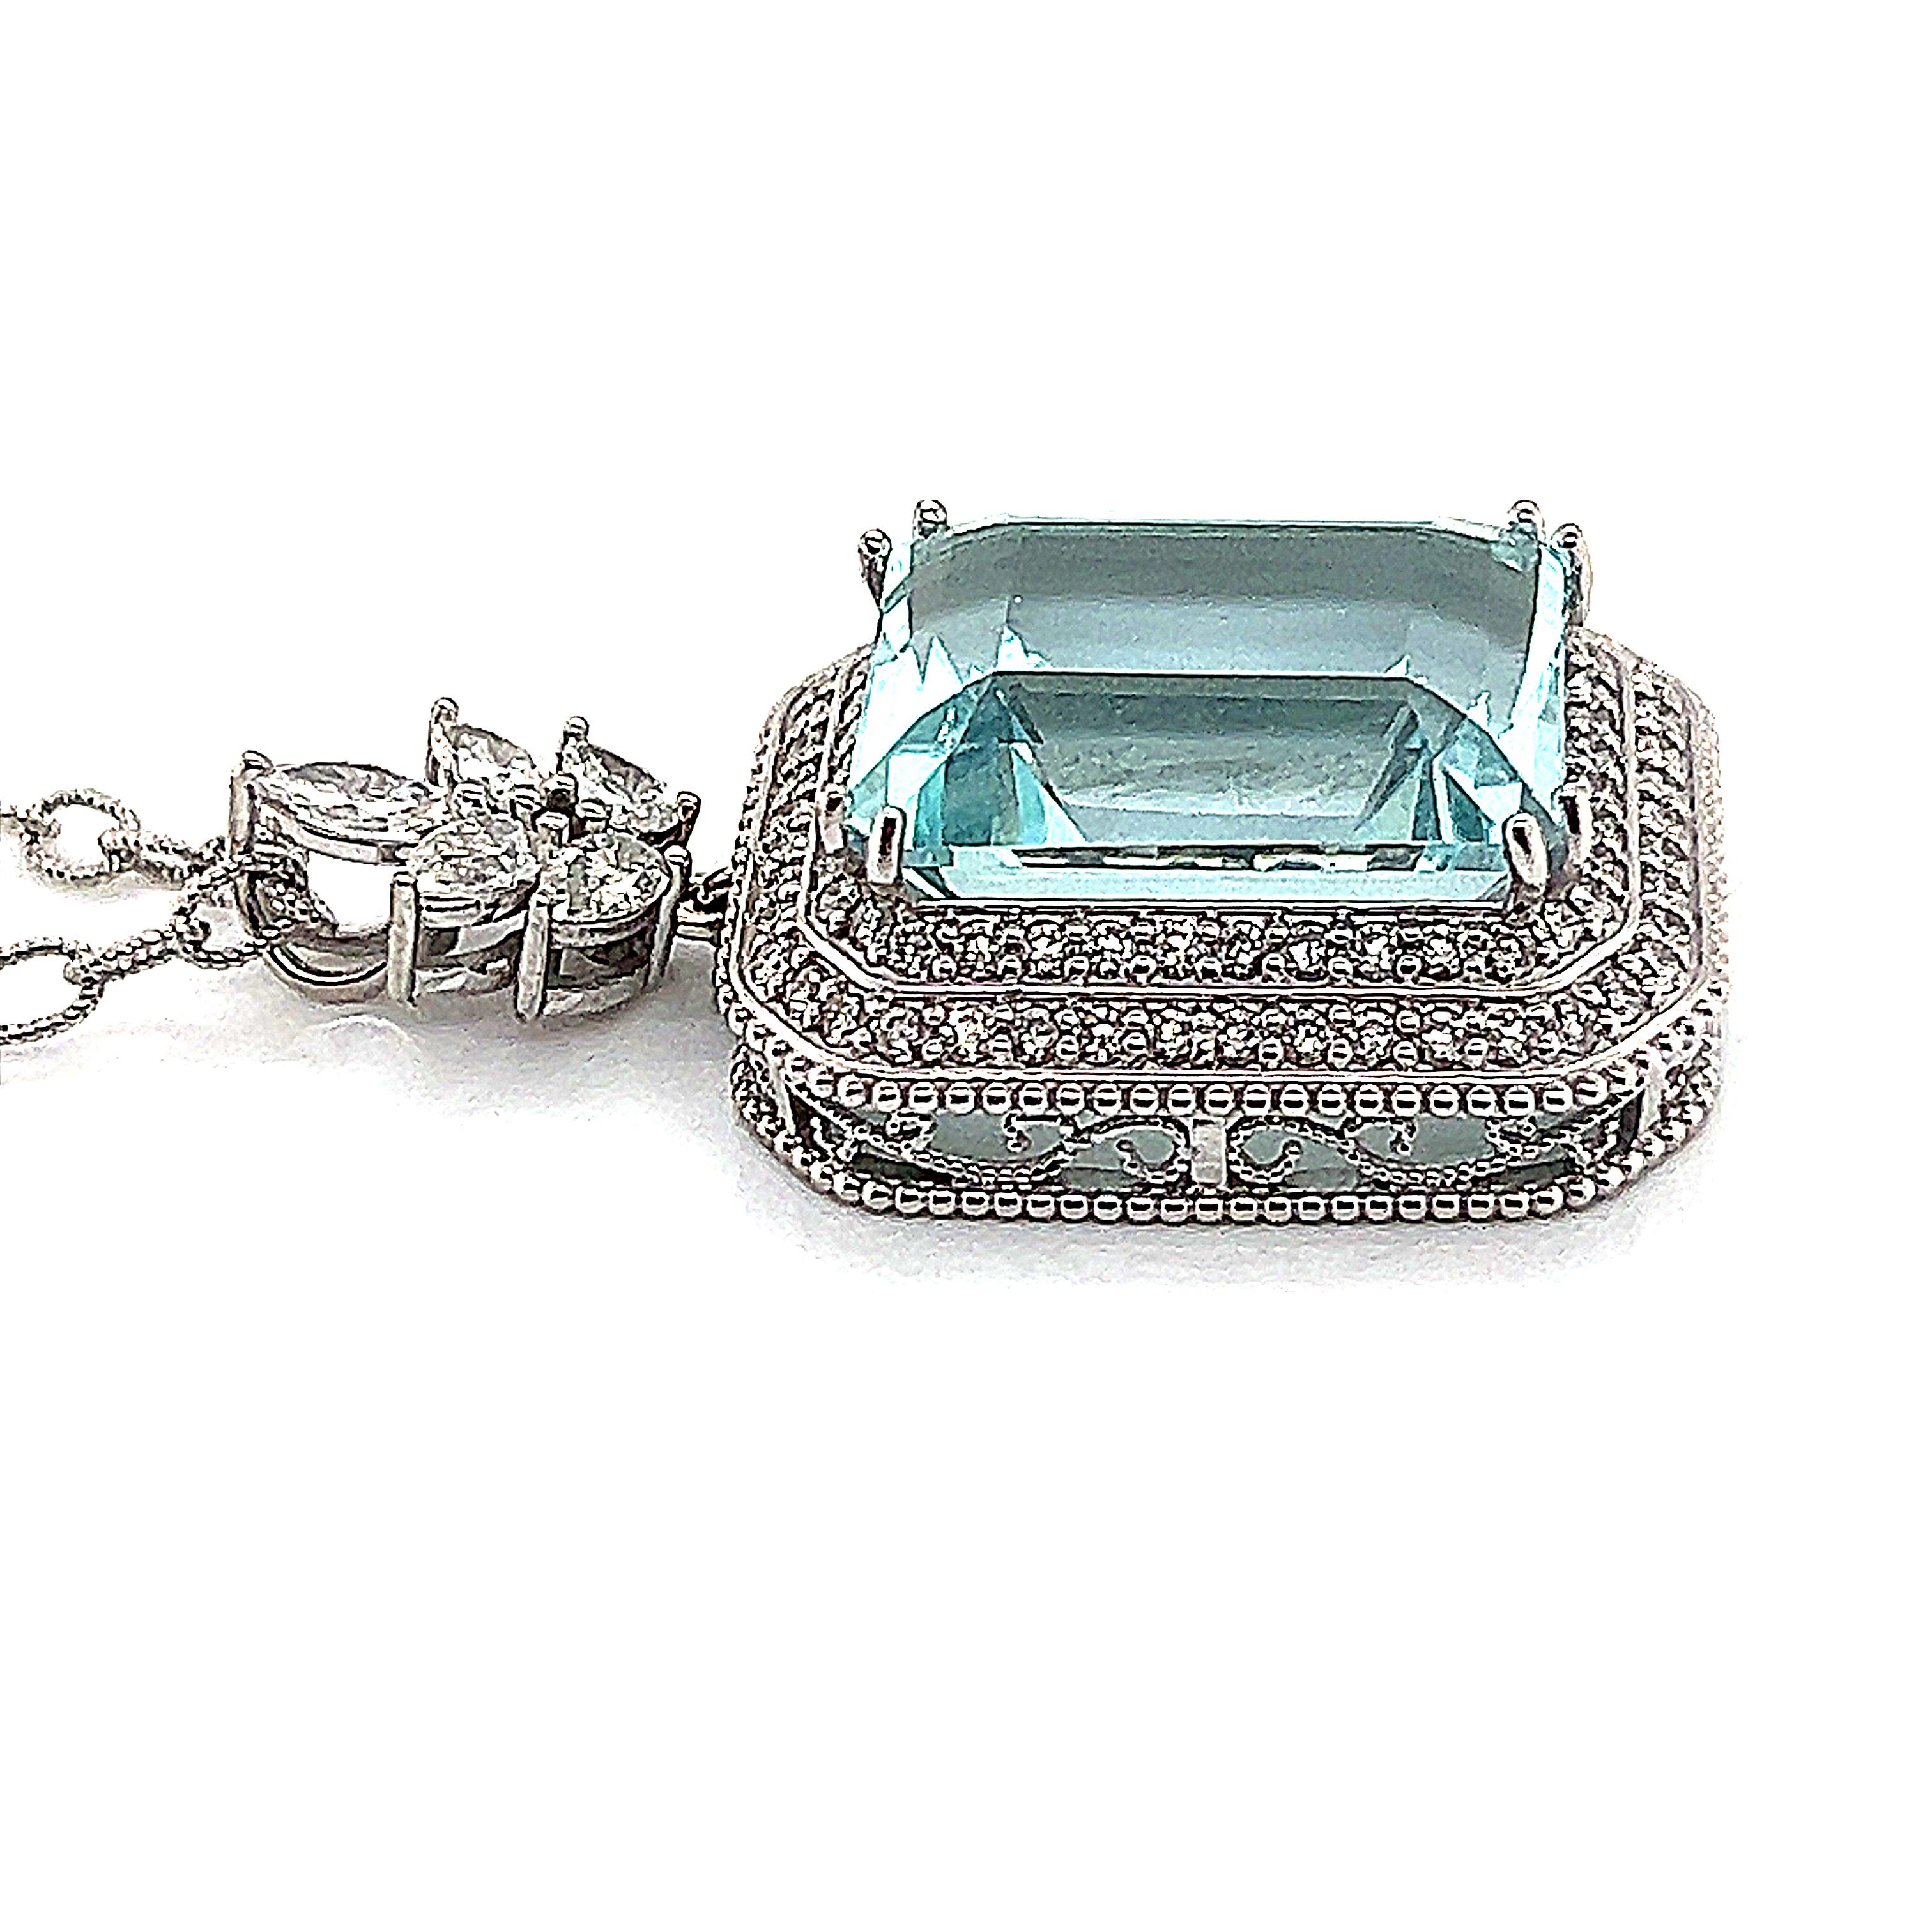 Emerald Cut Natural Aquamarine Diamond Gold Necklace 27 TCW GIA Certified $16, 475 121172 For Sale